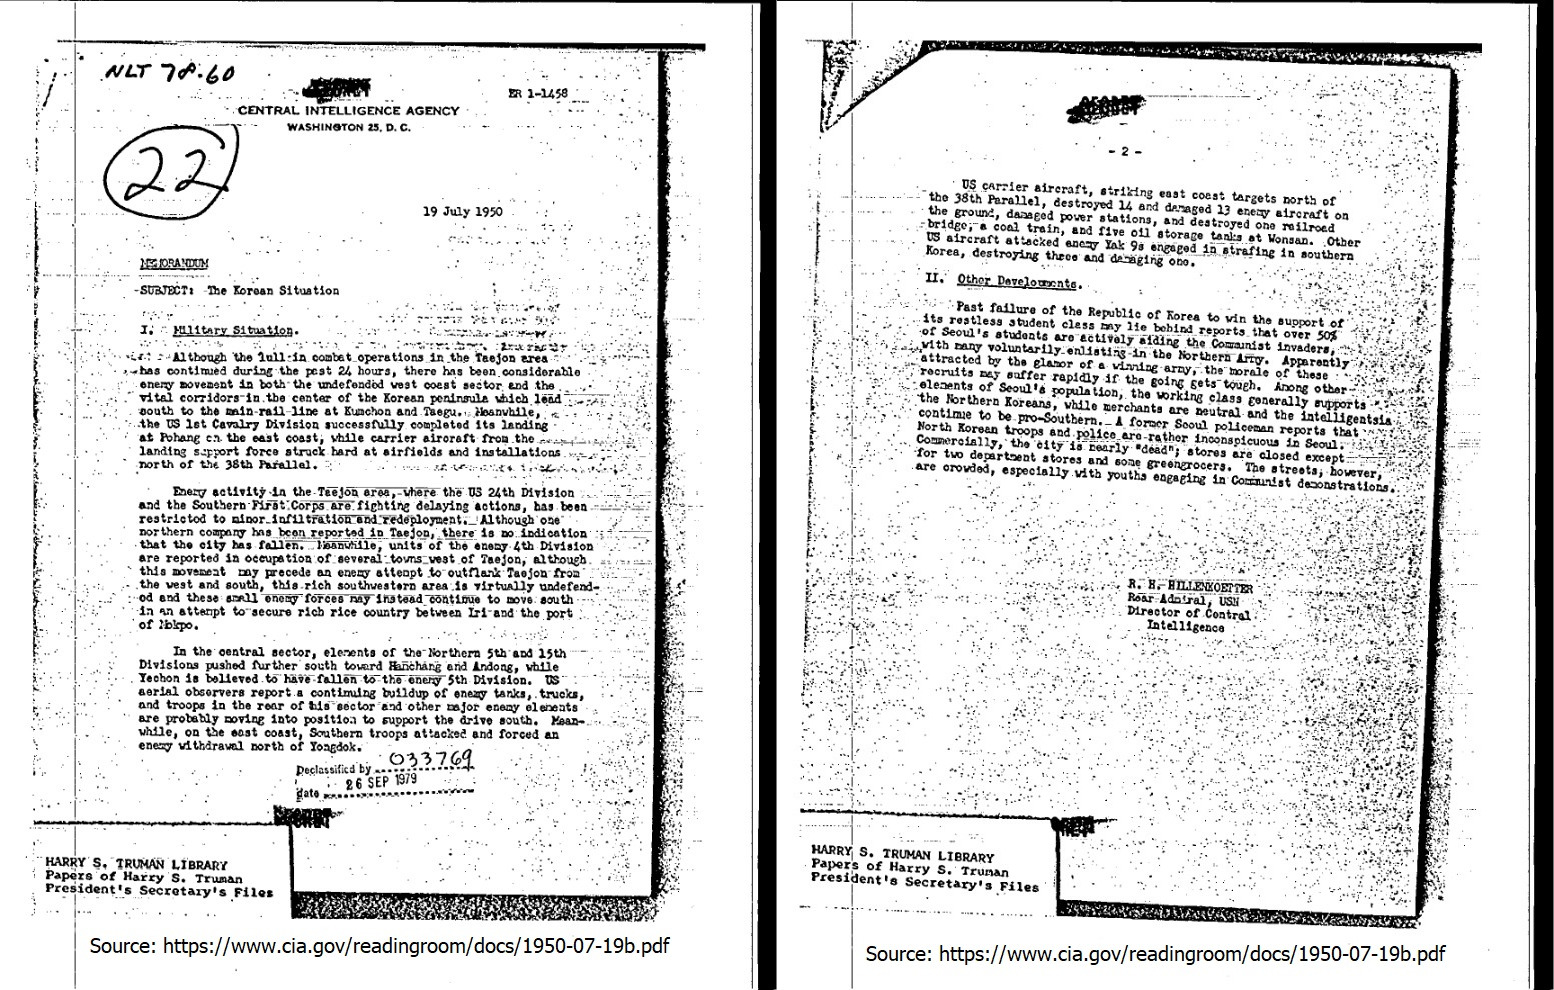 File:CIA document pages 1 and 2.jpg